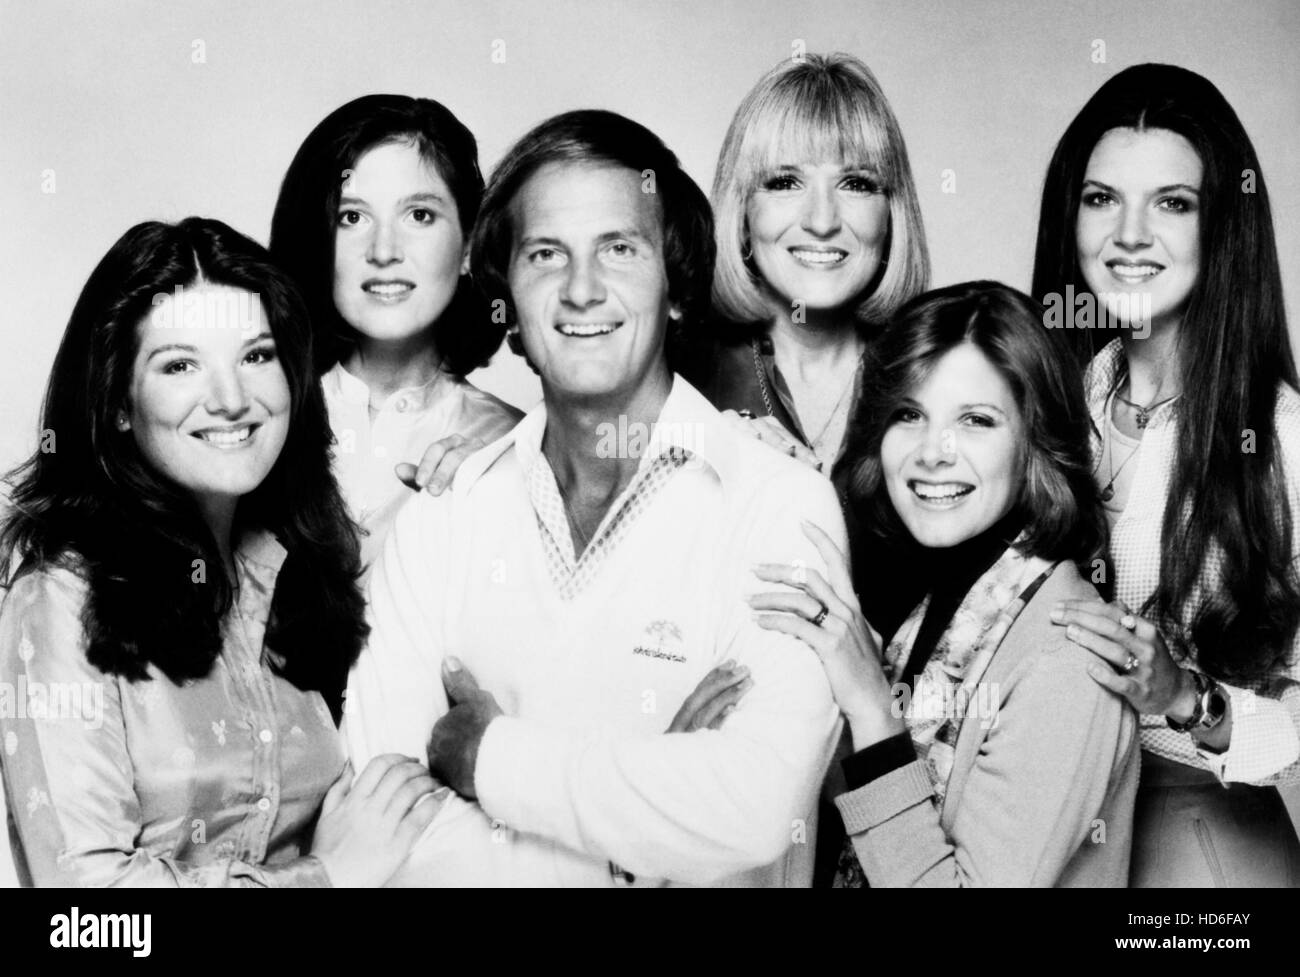 PAT BOONE AND FAMILY, from left, Laury Boone, Lindy Boone, Pat Boone, Shirley Boone, Debby Boone, Cherry Boone, aired April 5, Stock Photo